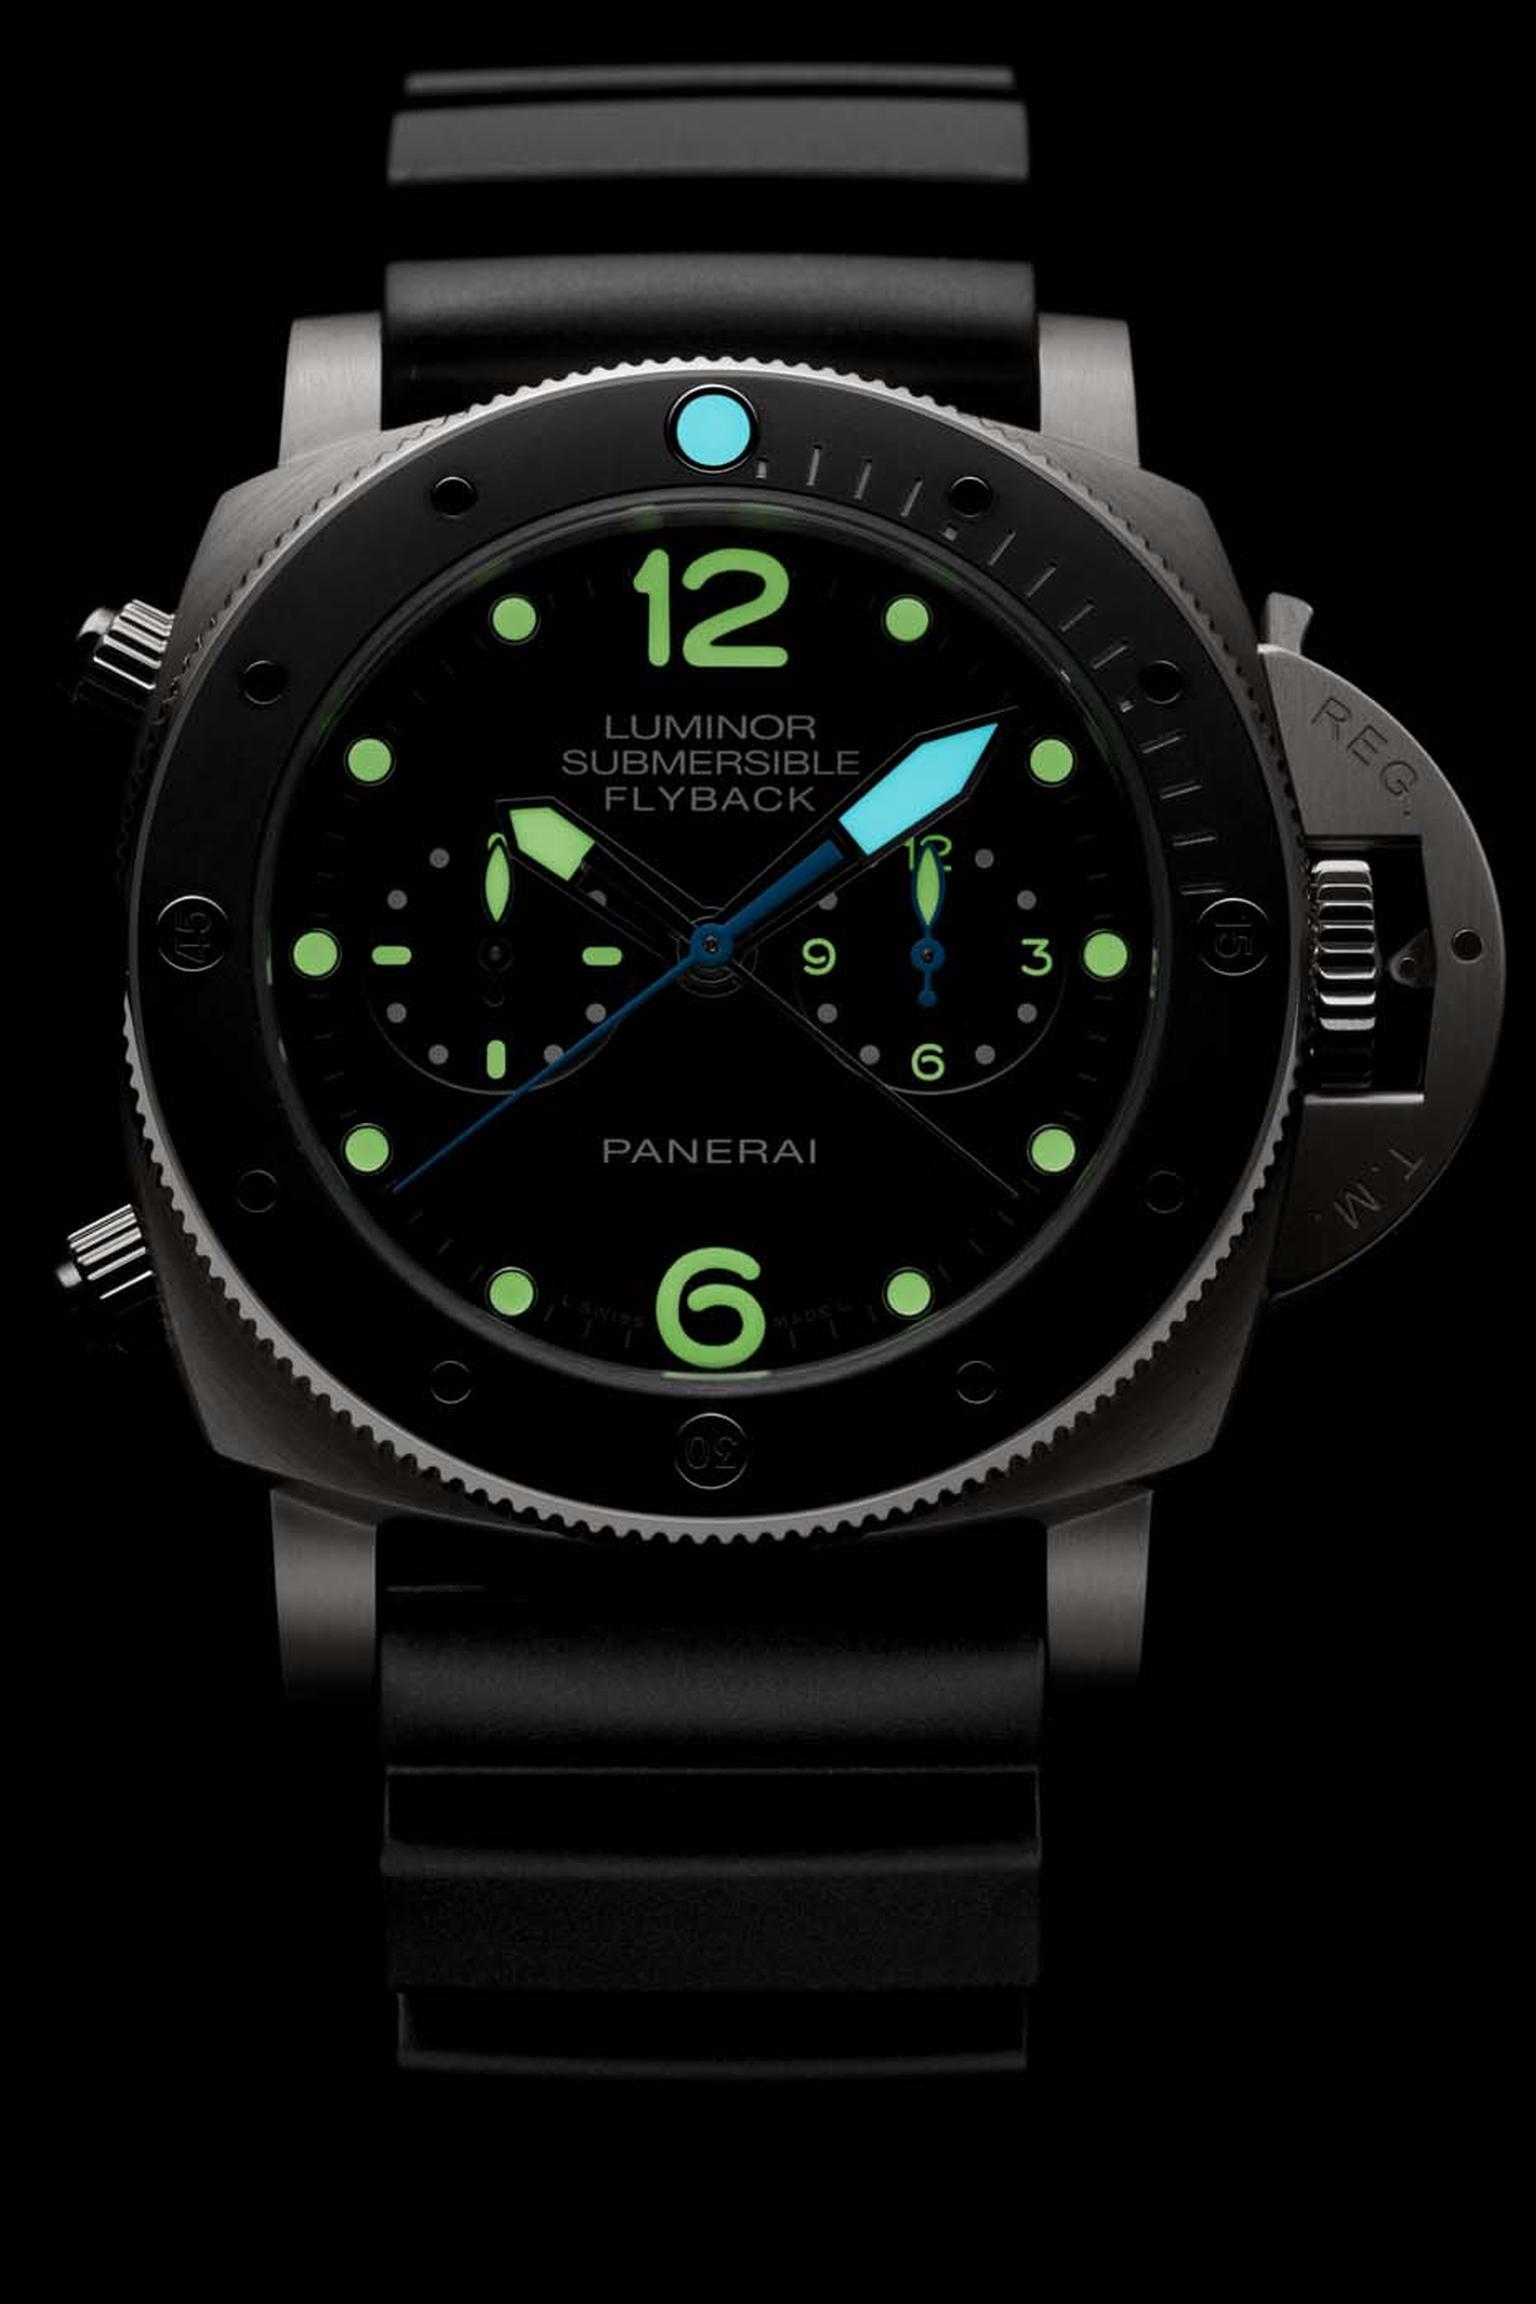 Panerai Luminor Submersible 1950 3 Days flyback chronograph was presented this year at the SIHH watch salon. The 47mm titanium case and dial of this professional dive watch, with water-resistance to 300 metres, glows in the depths thanks to the applicatio